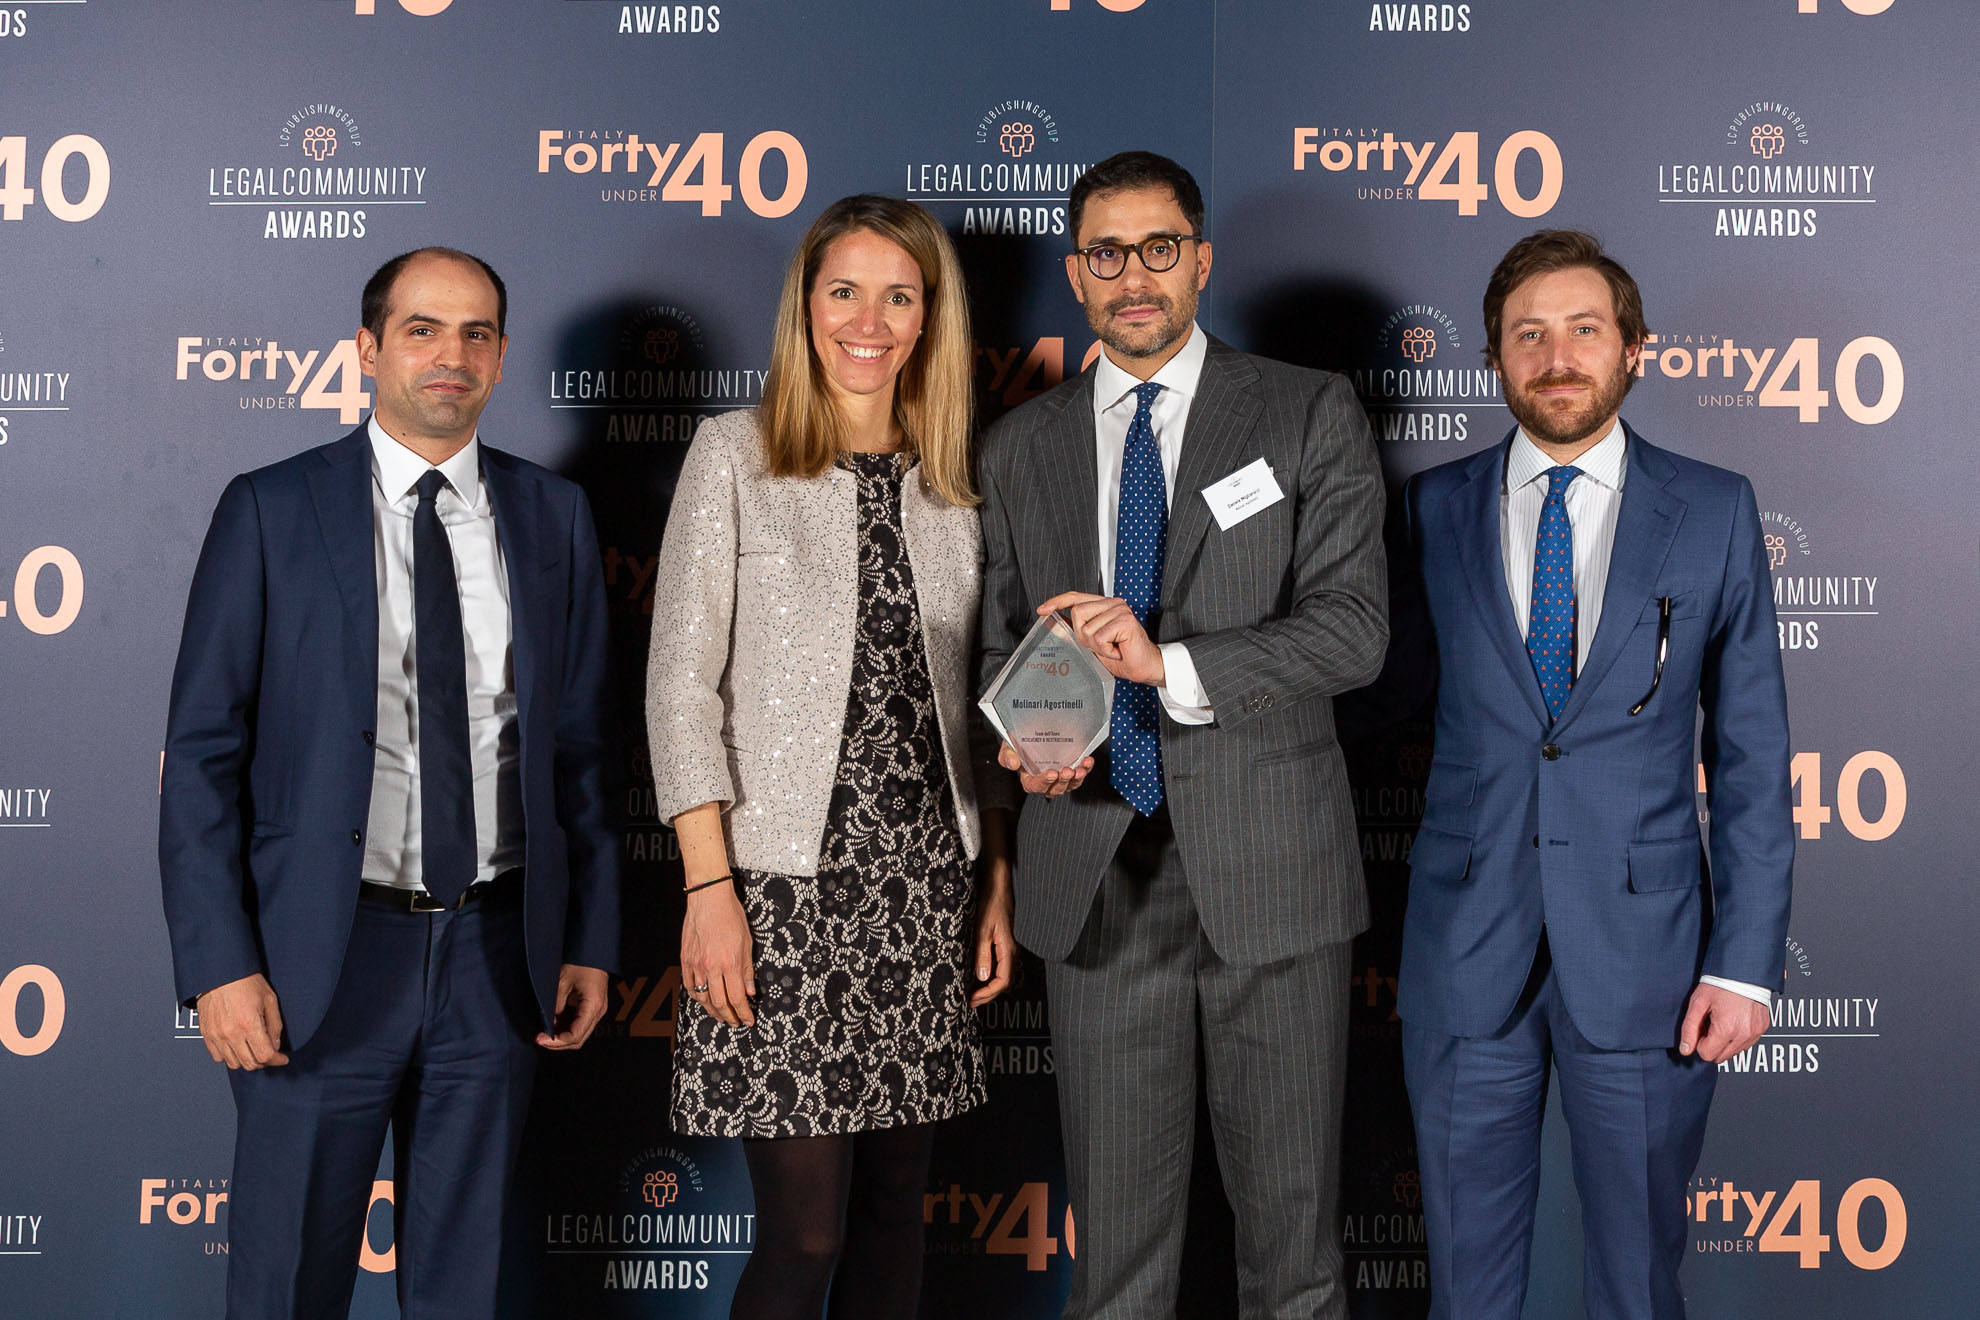 Molinari Agostinelli named Restructuring and Insolvency Firm of the Year at the 2022 Legalcommunity Litigation Awards